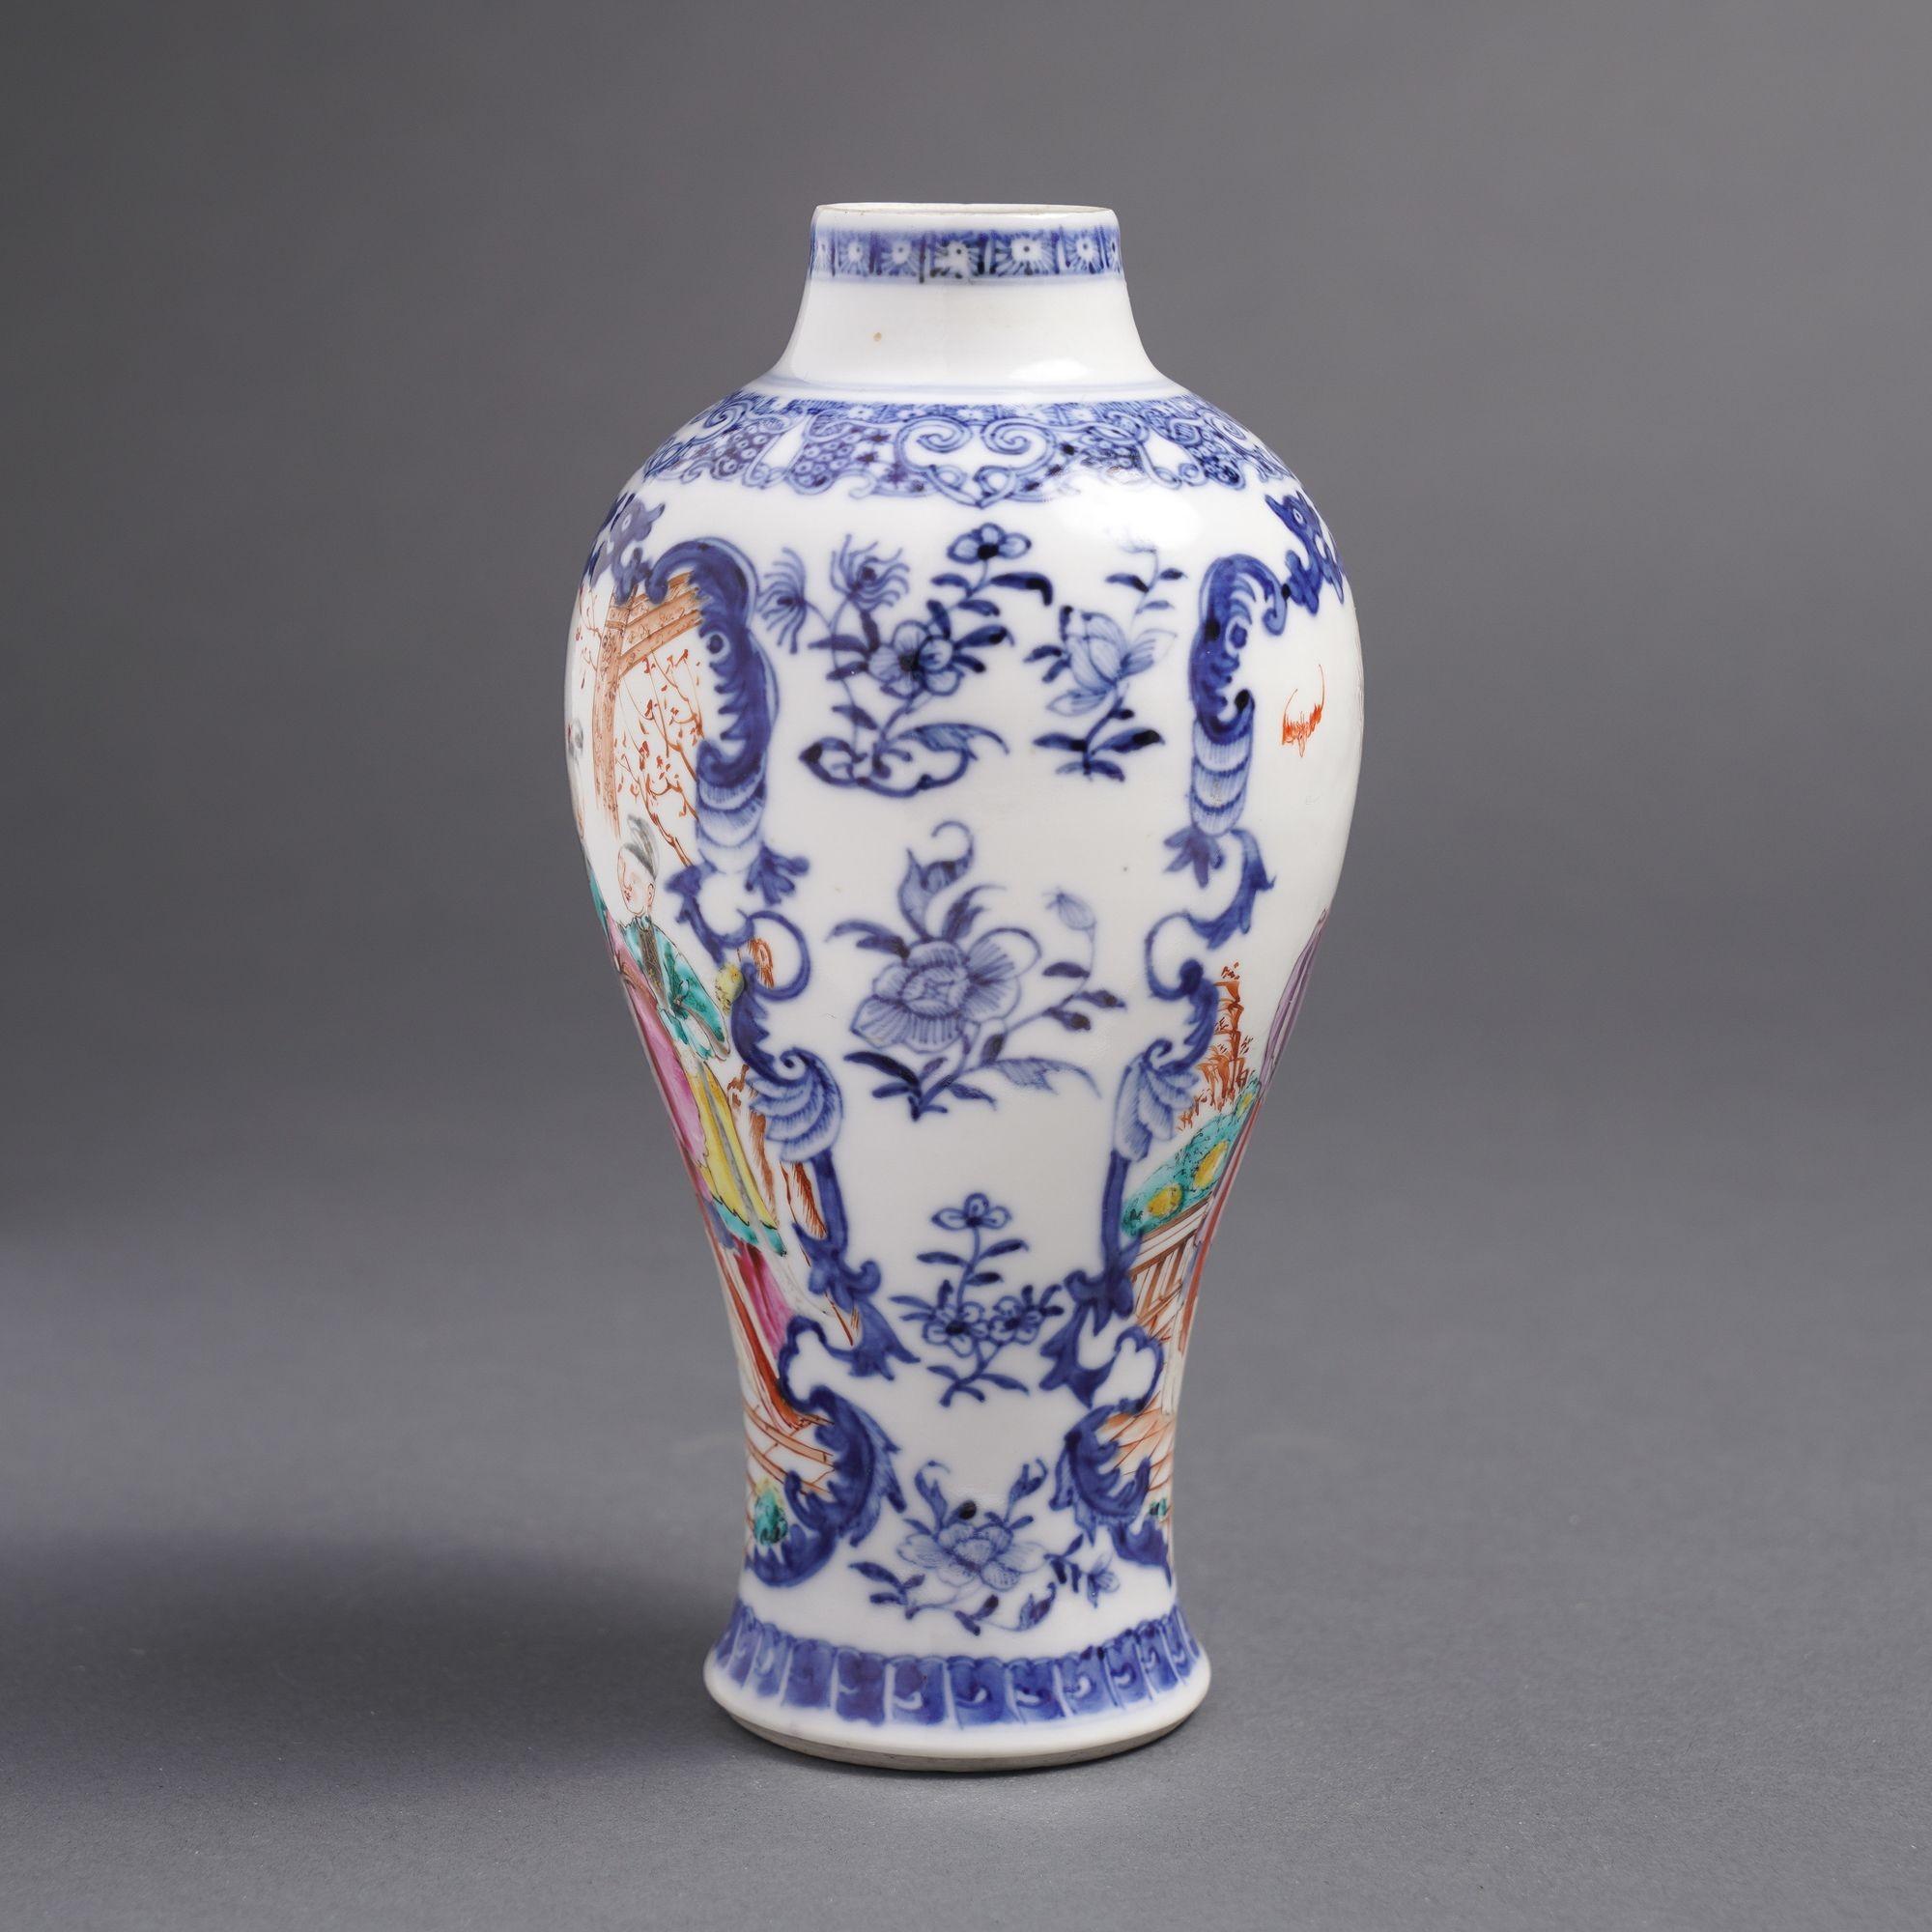 Chinese export baluster form garniture vase with famille rose figural scenes within cobalt under glaze blue scroll work borders, on opposing sides of the vase.

China, made for the Western trade, circa 1780.